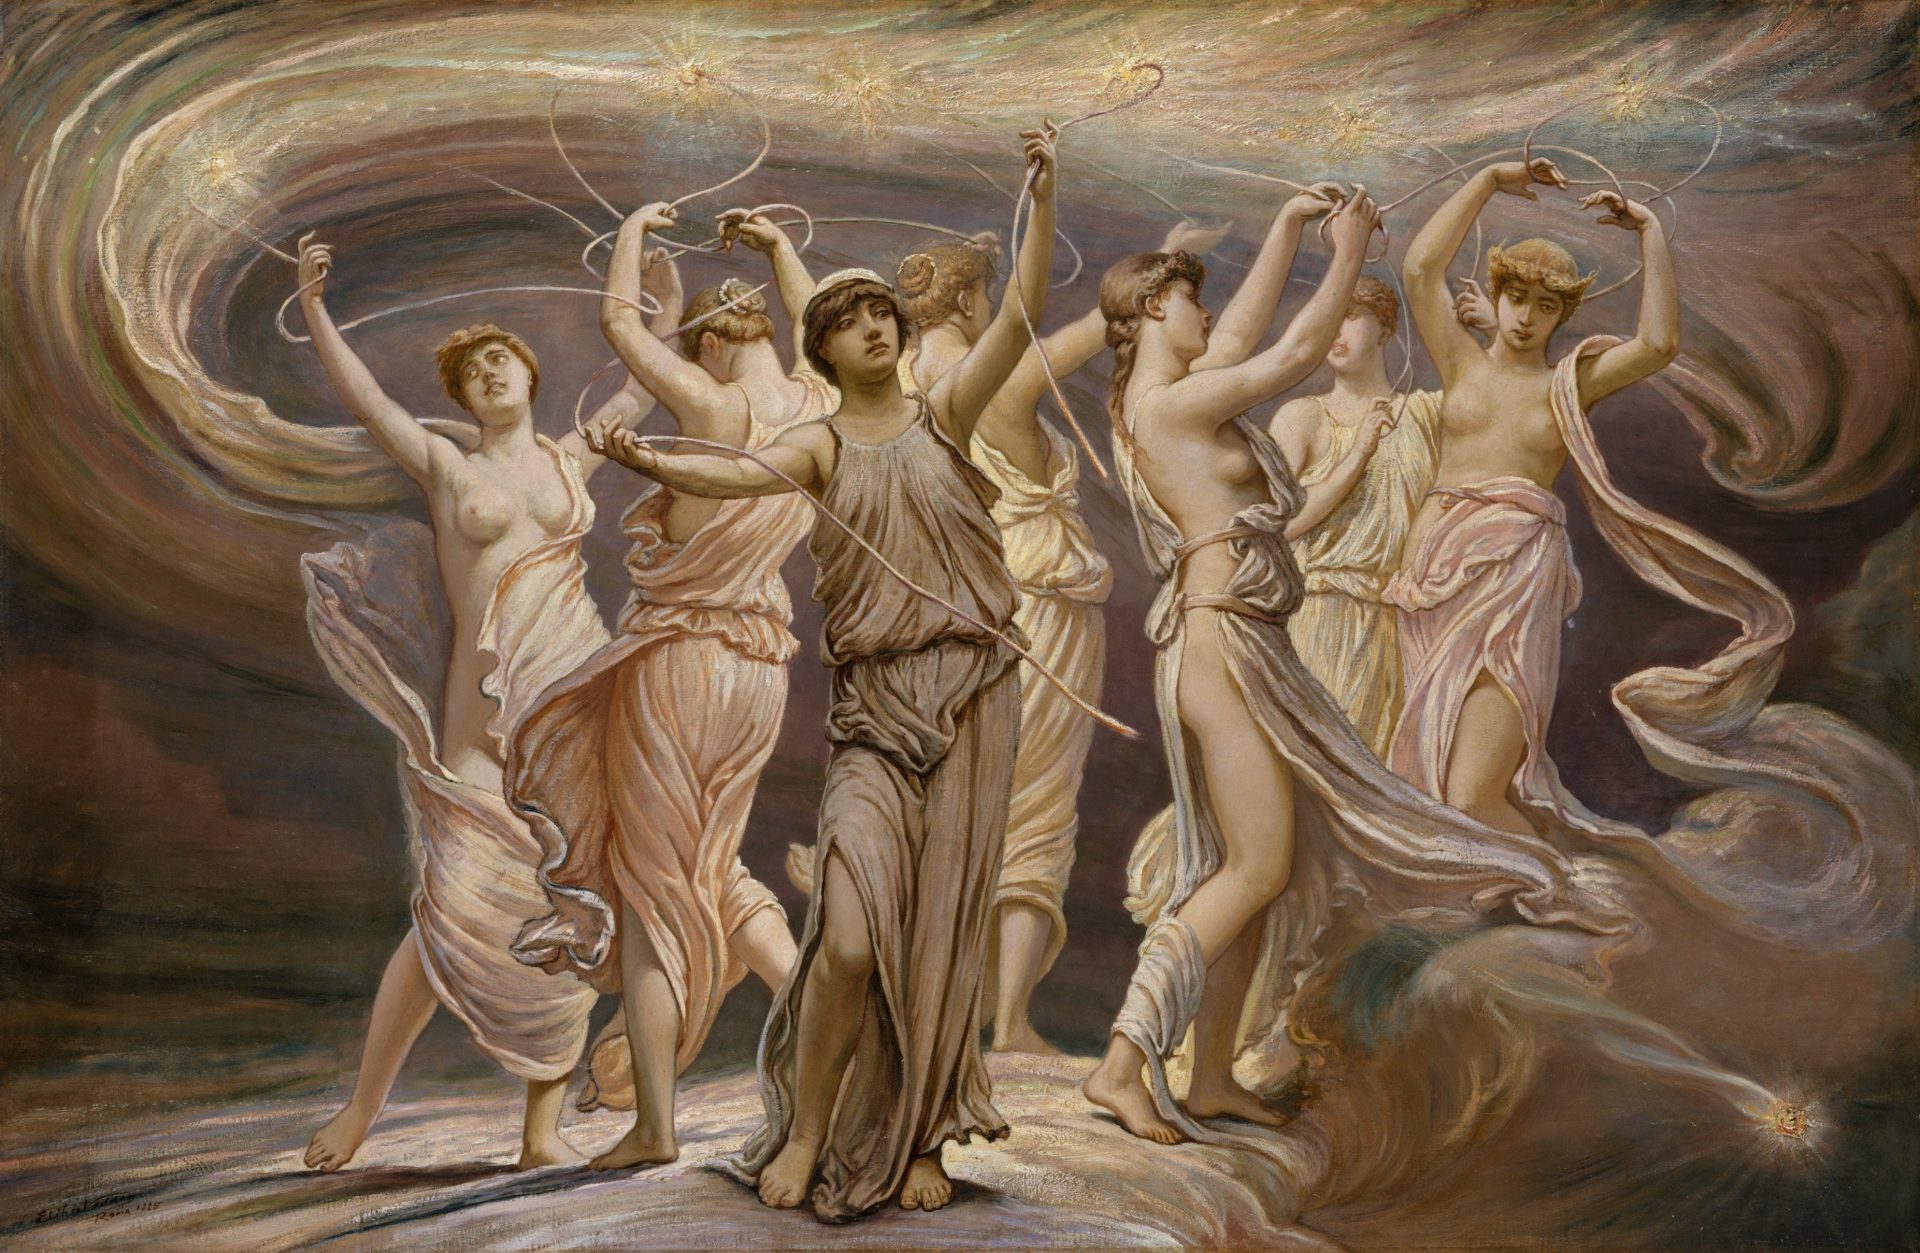 A painting of seven women in a celestial dance, the Pleiades sisters